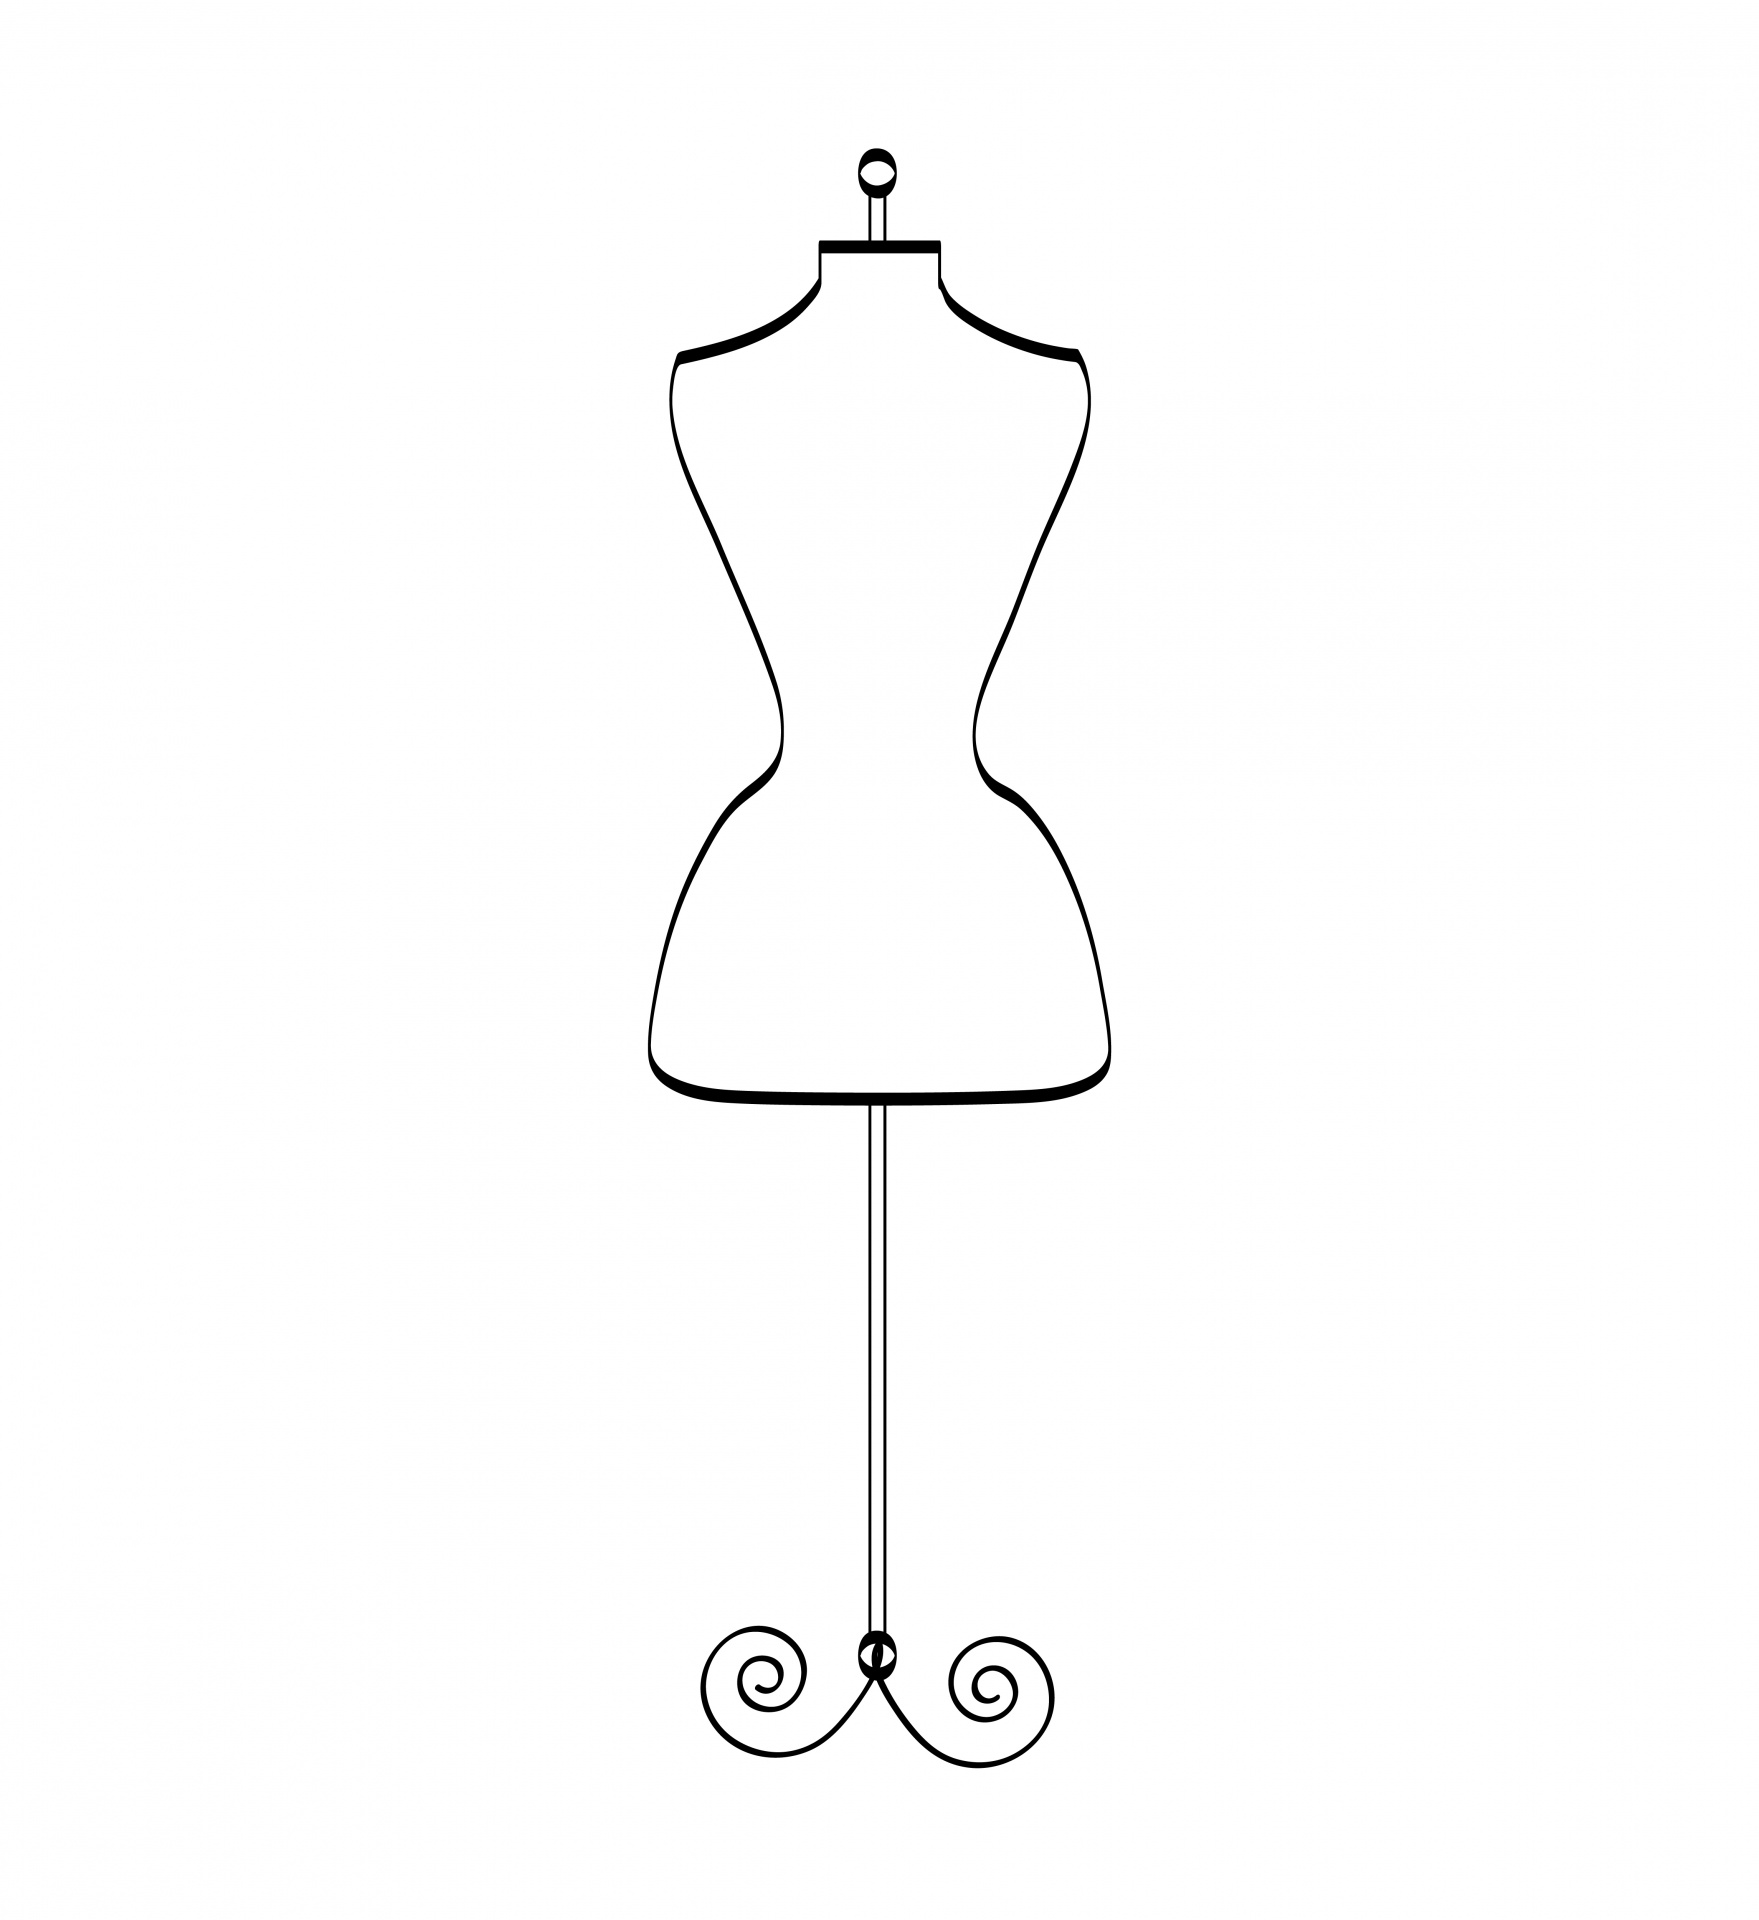 Retro vintage style hand drawn tailors dummy, dress form clipart